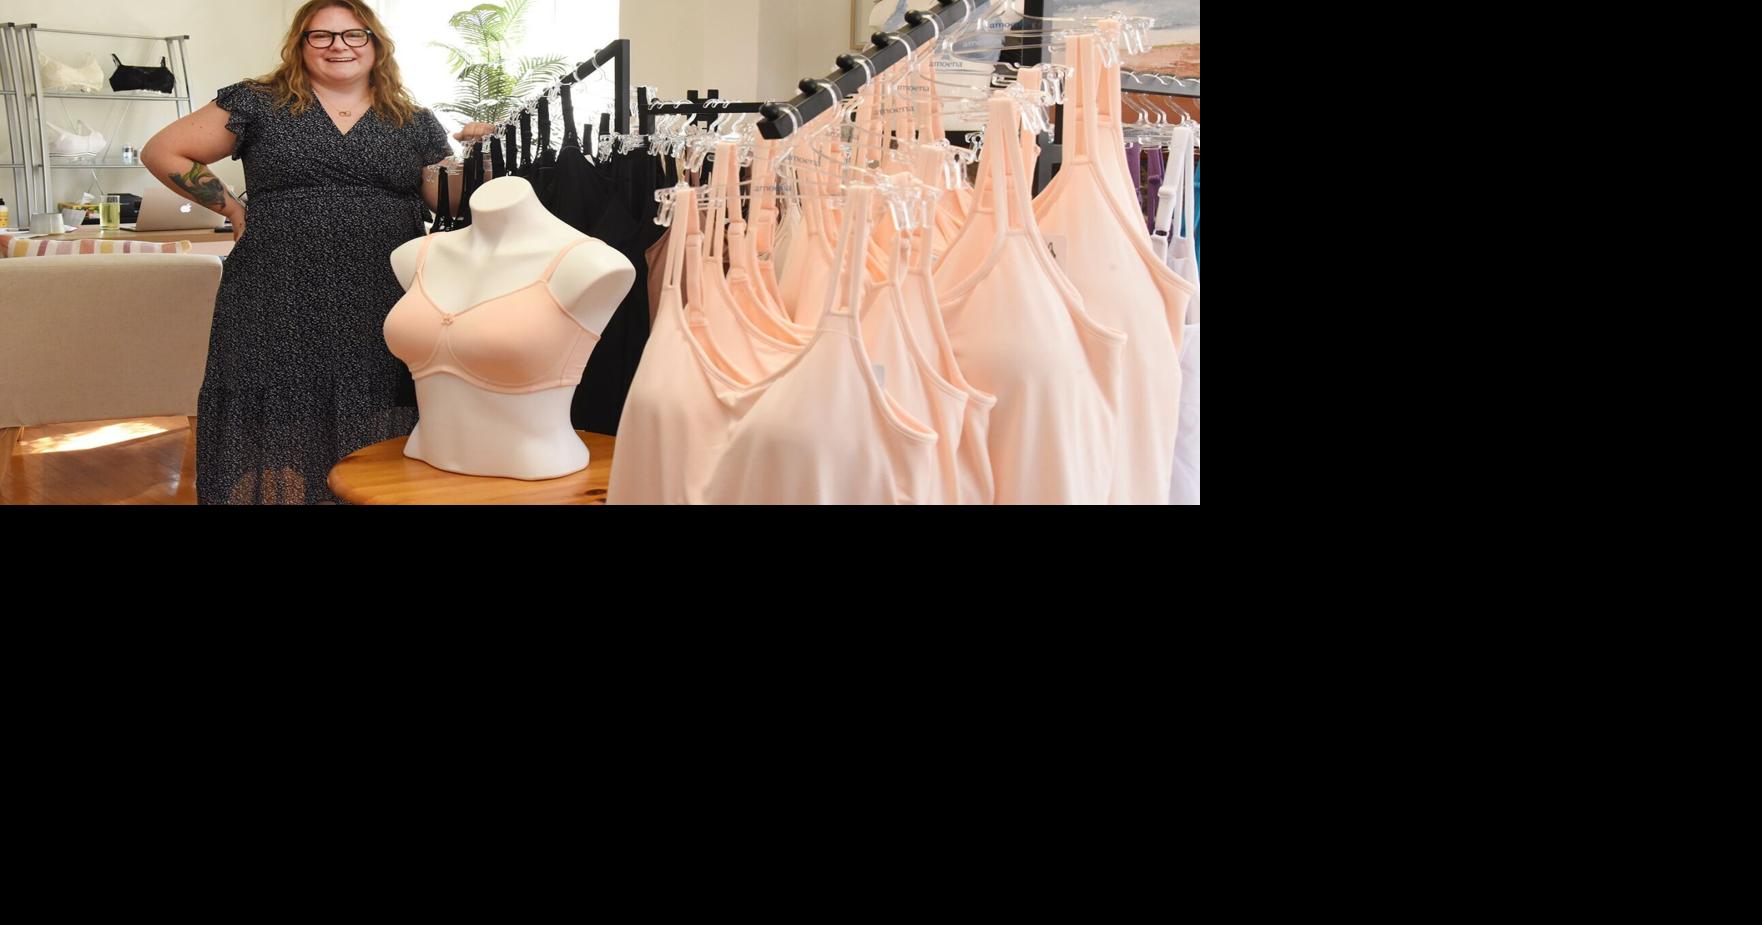 Boutique offers services to women coping with breast cancer